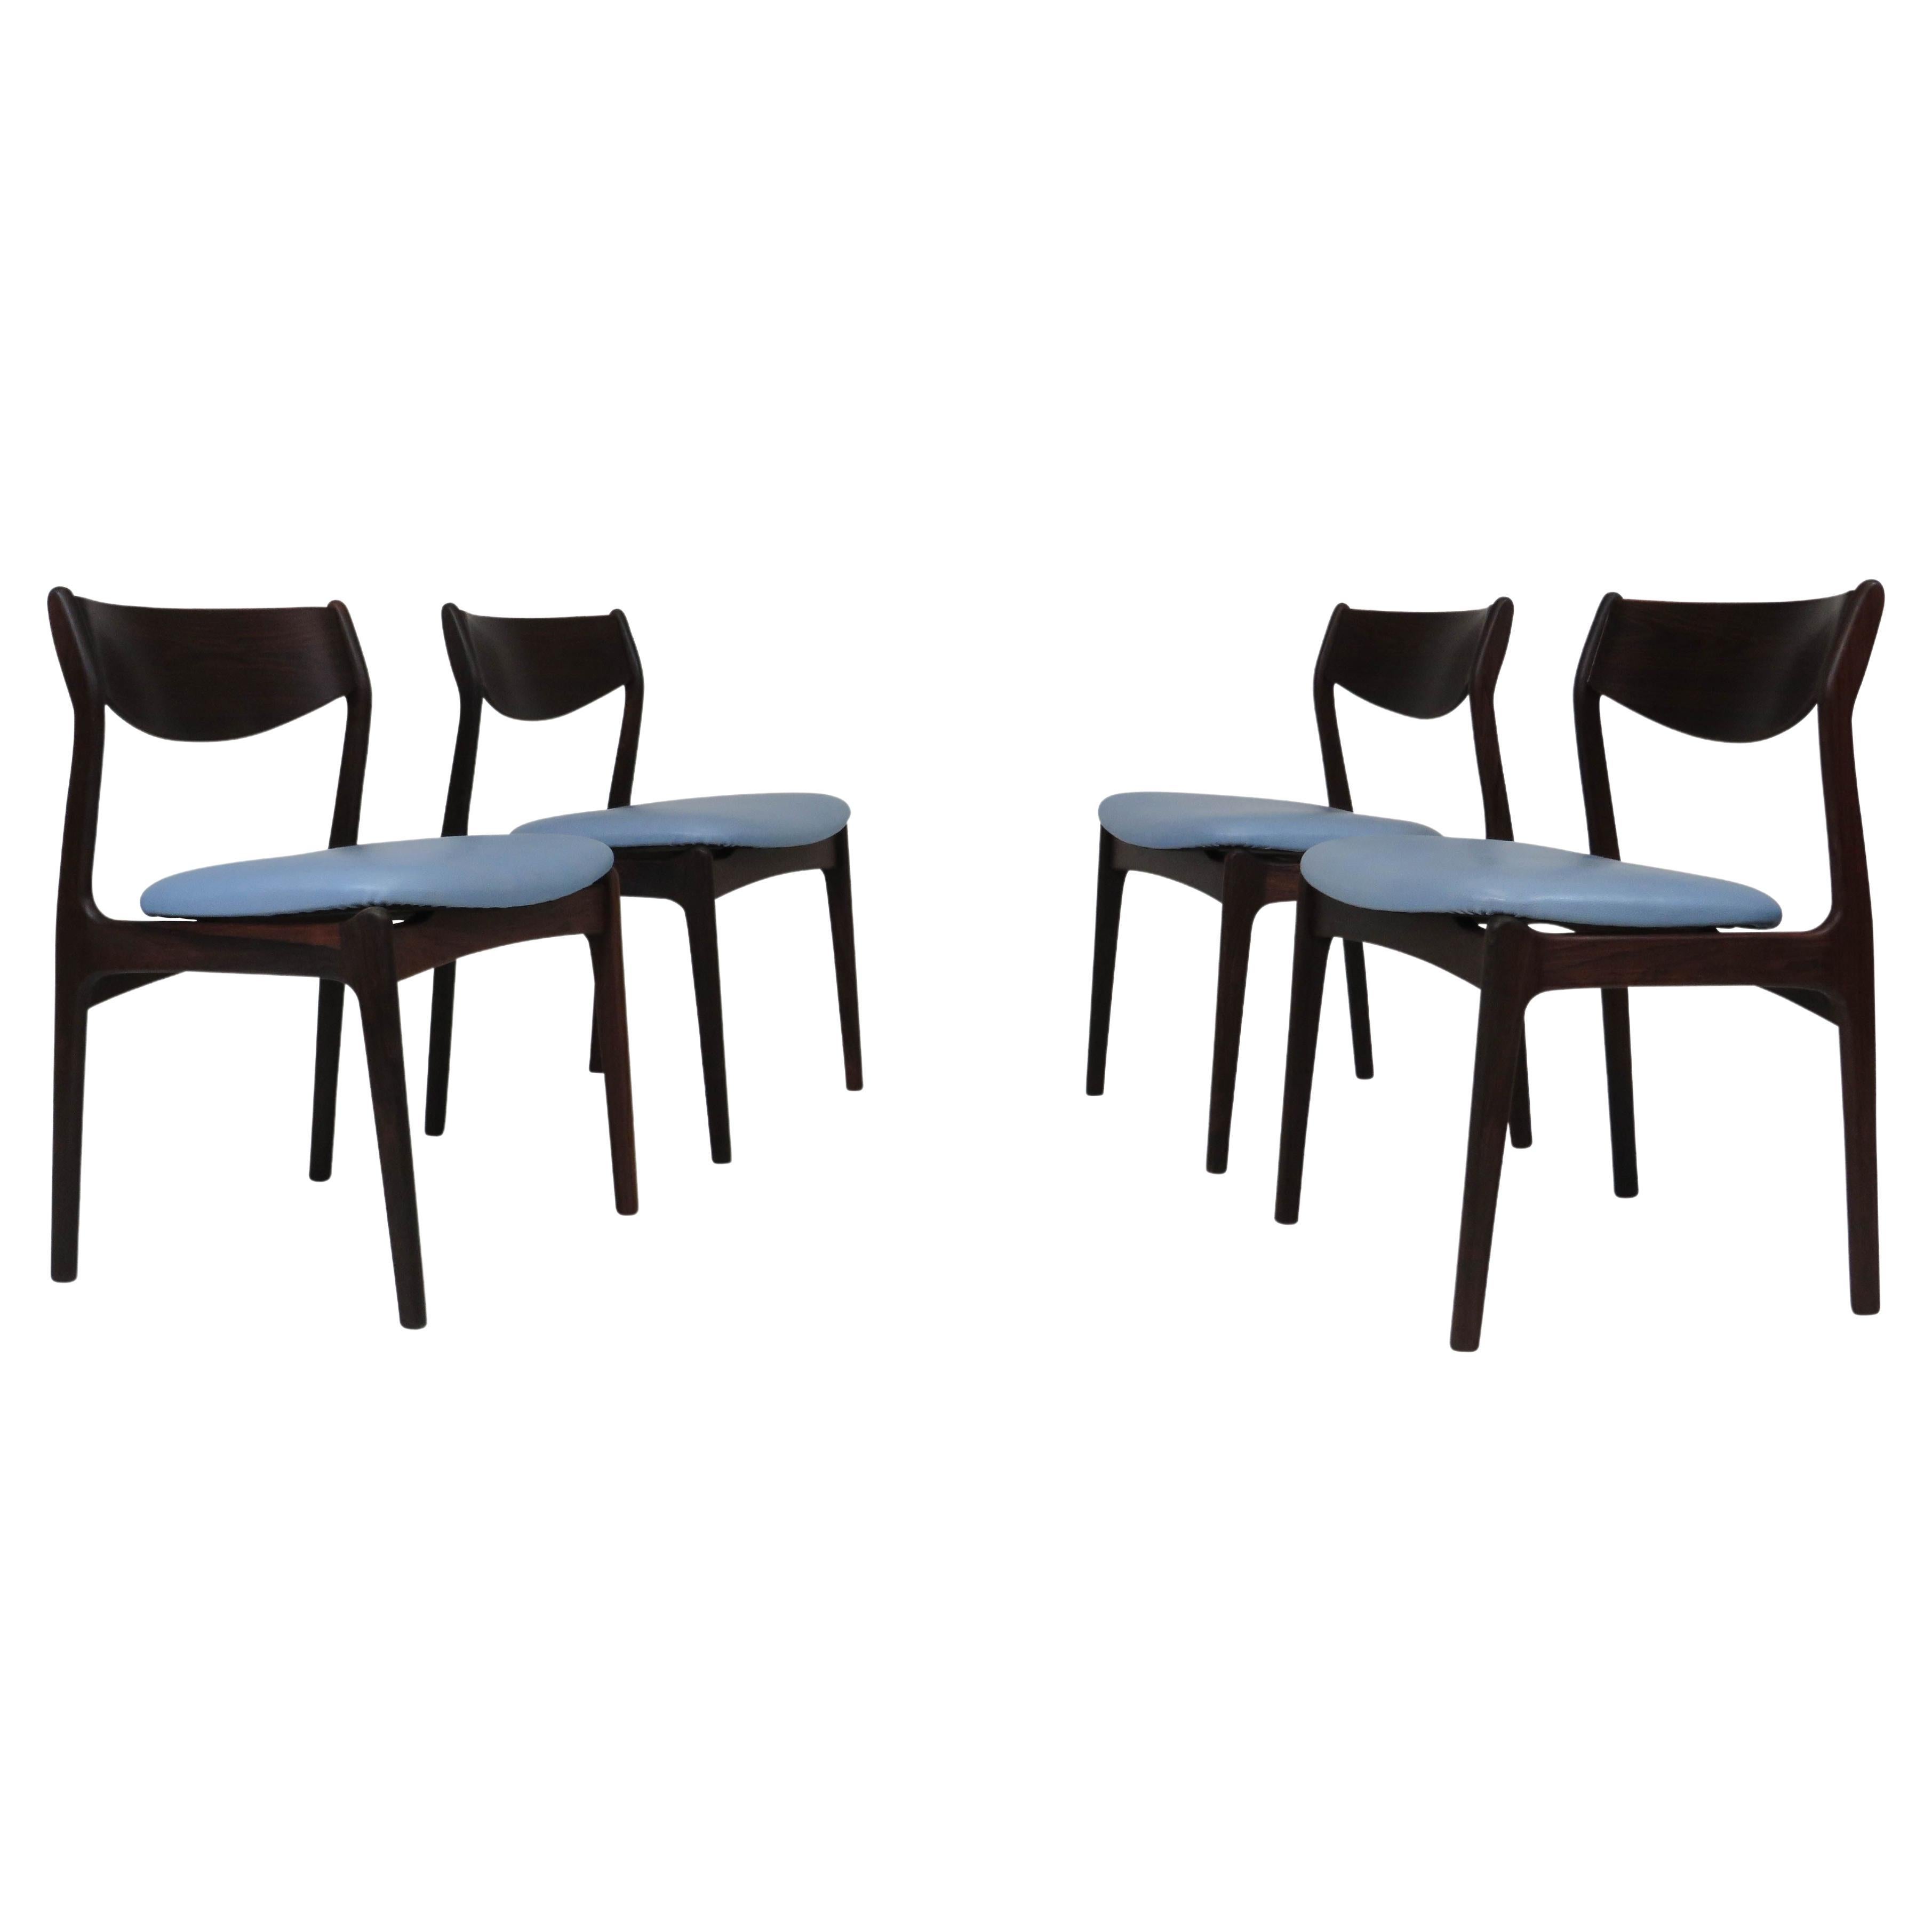 Four PE Jorgensen Danish Rosewood Dining Chairs in Sky Blue Leather